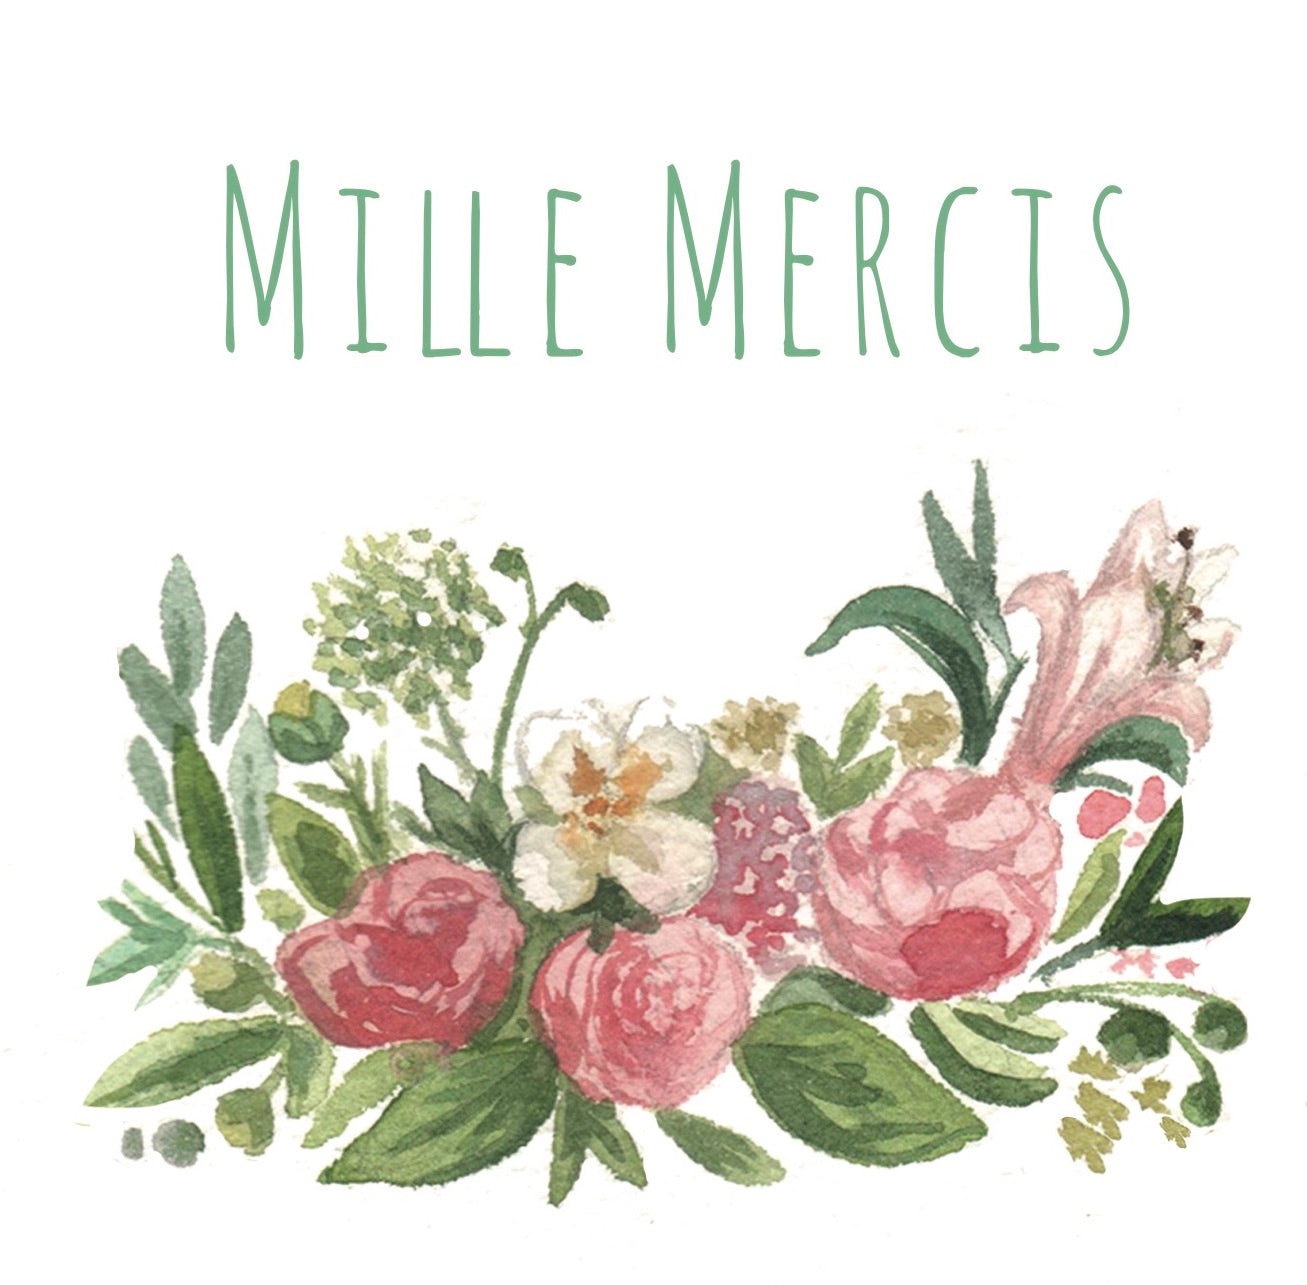 ;MILLEMERCI;MILLE MERCIS CARD;MESSAGE CARDS;-;Active;3